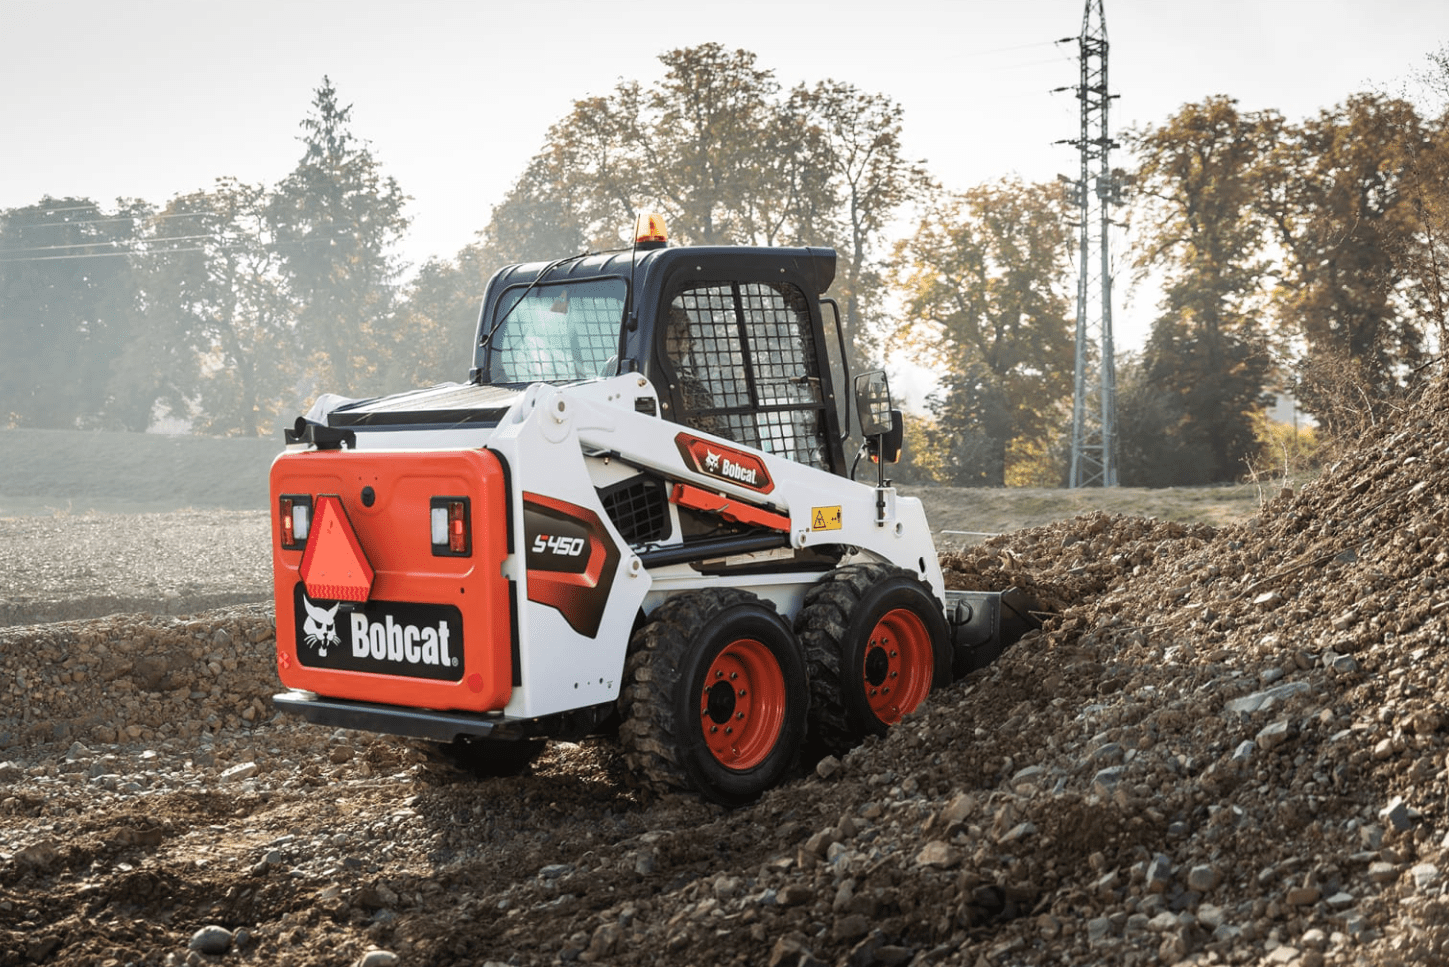 Browse Specs and more for the Bobcat S450 Skid-Steer Loader - Bobcat of North Texas